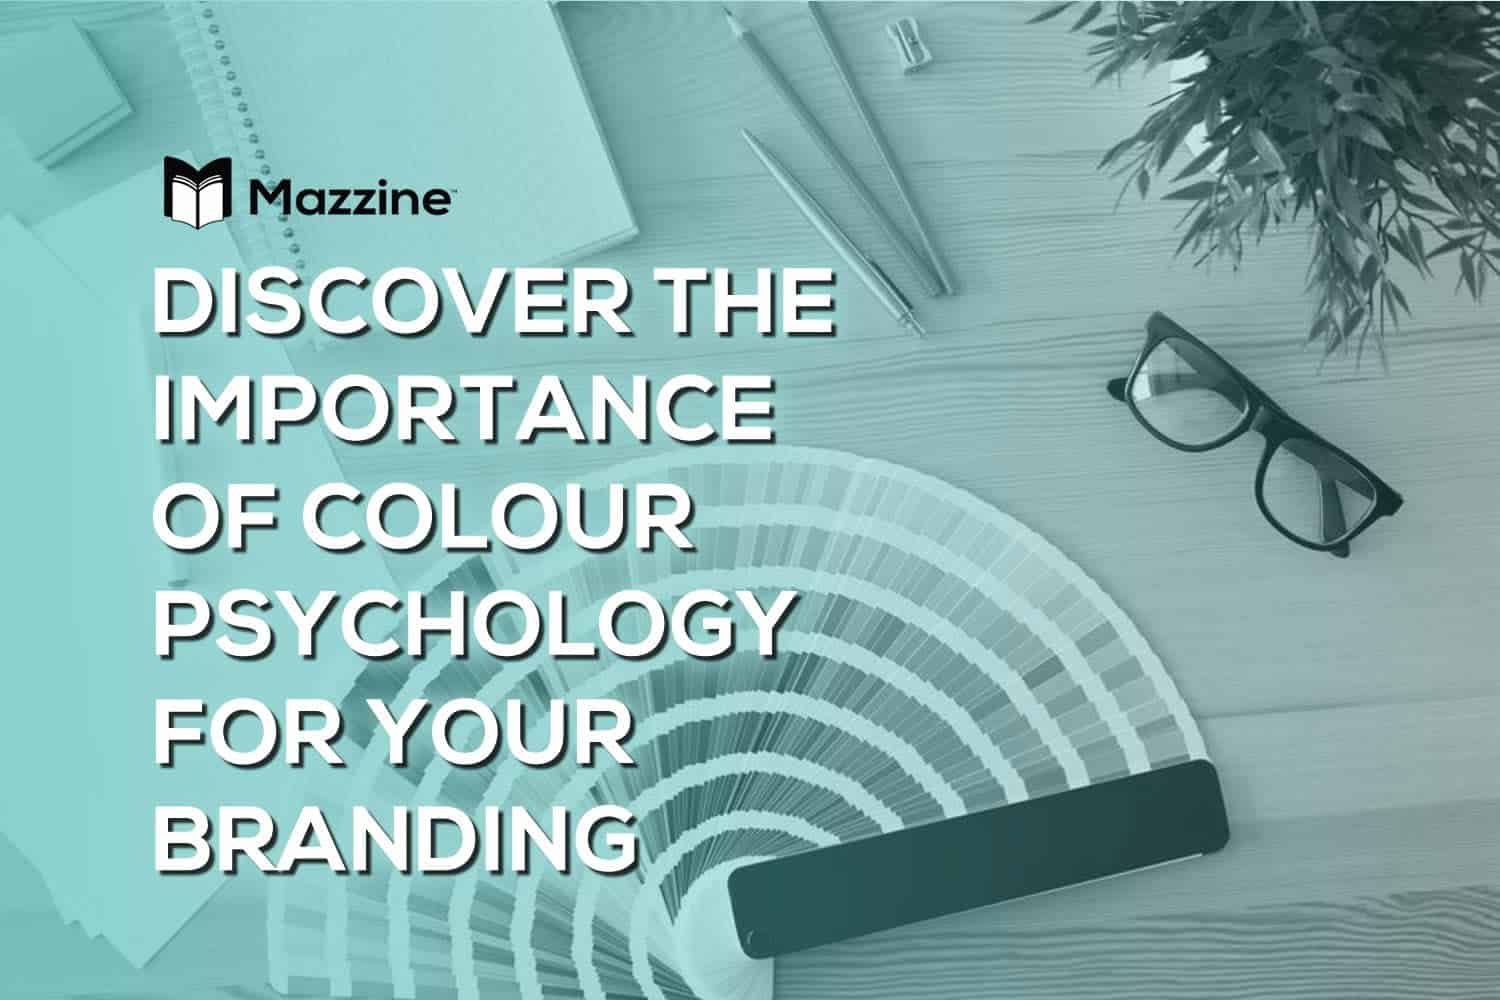 Discover-the-Importance-of-Colour-Psychology-for-Your-Branding